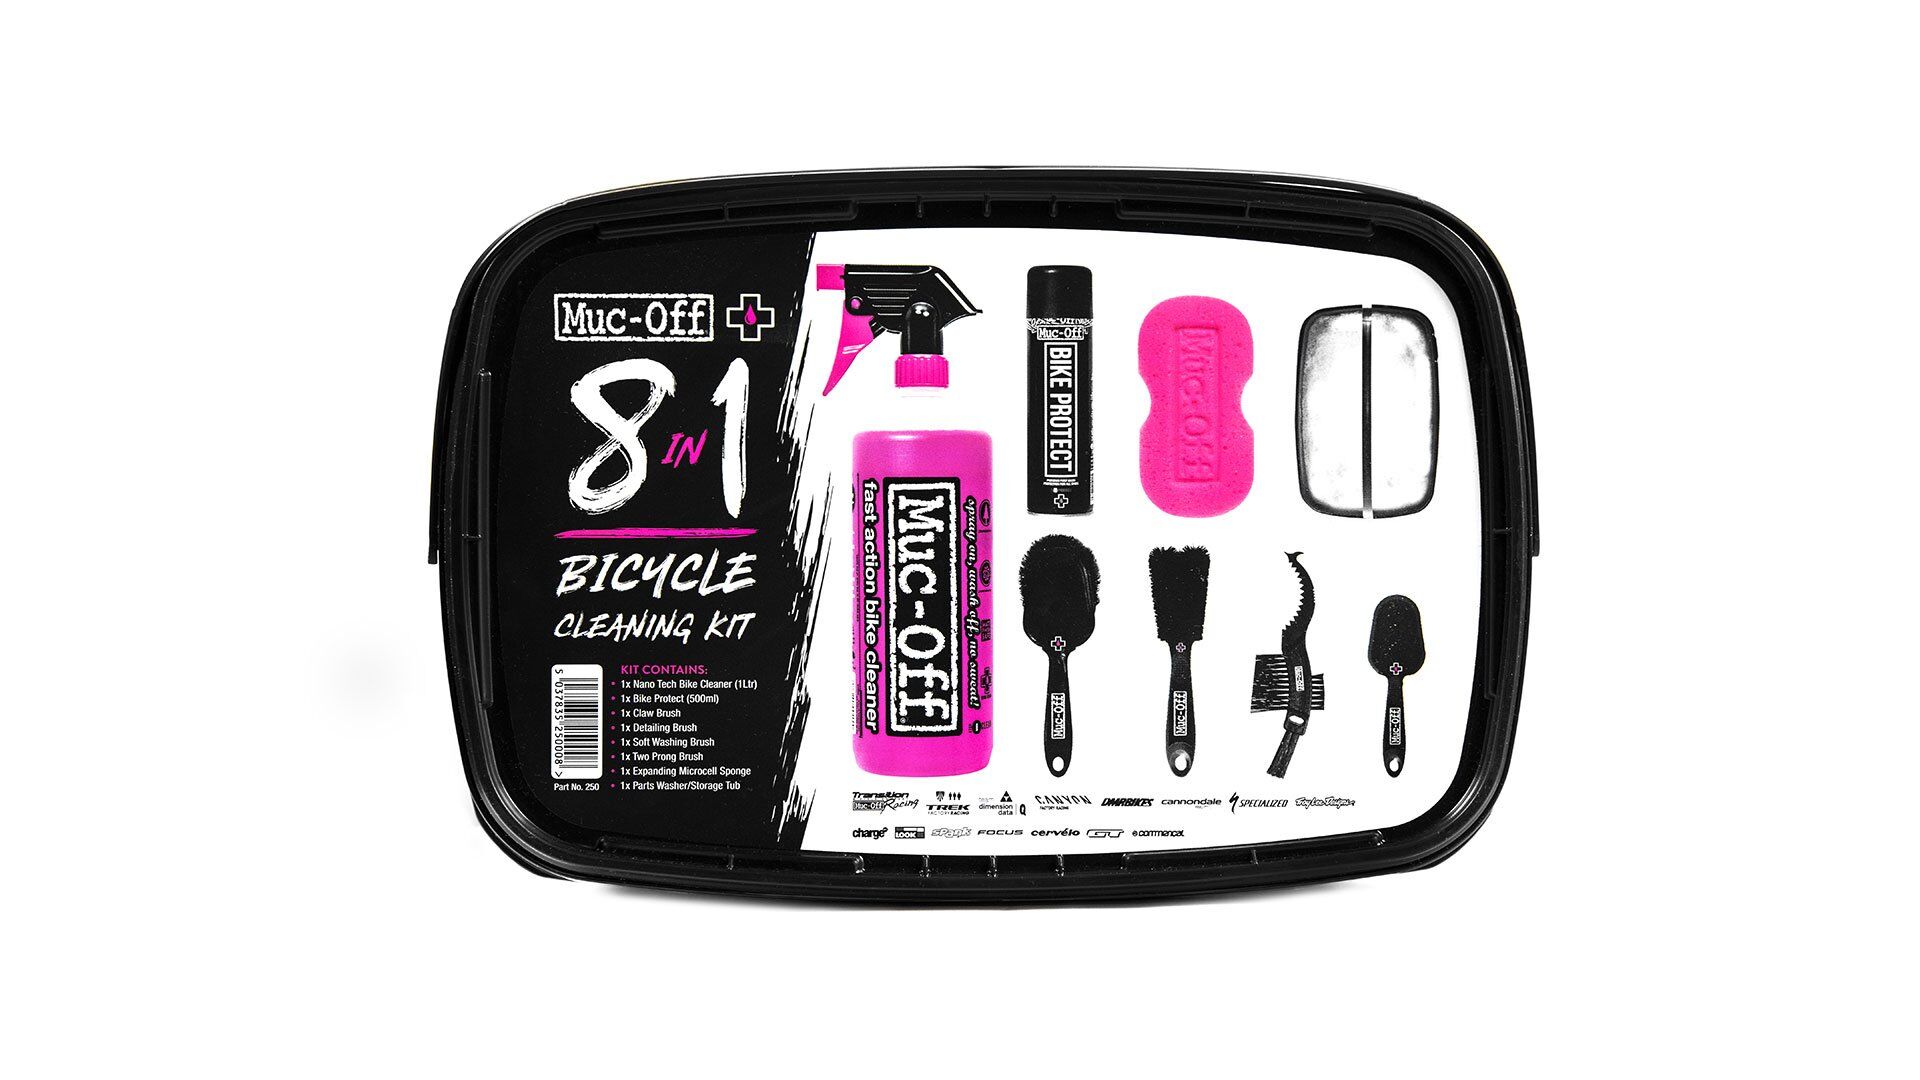 Muc-Off 8 In 1 Bicycle Cleaning Kit - Reinigungsset